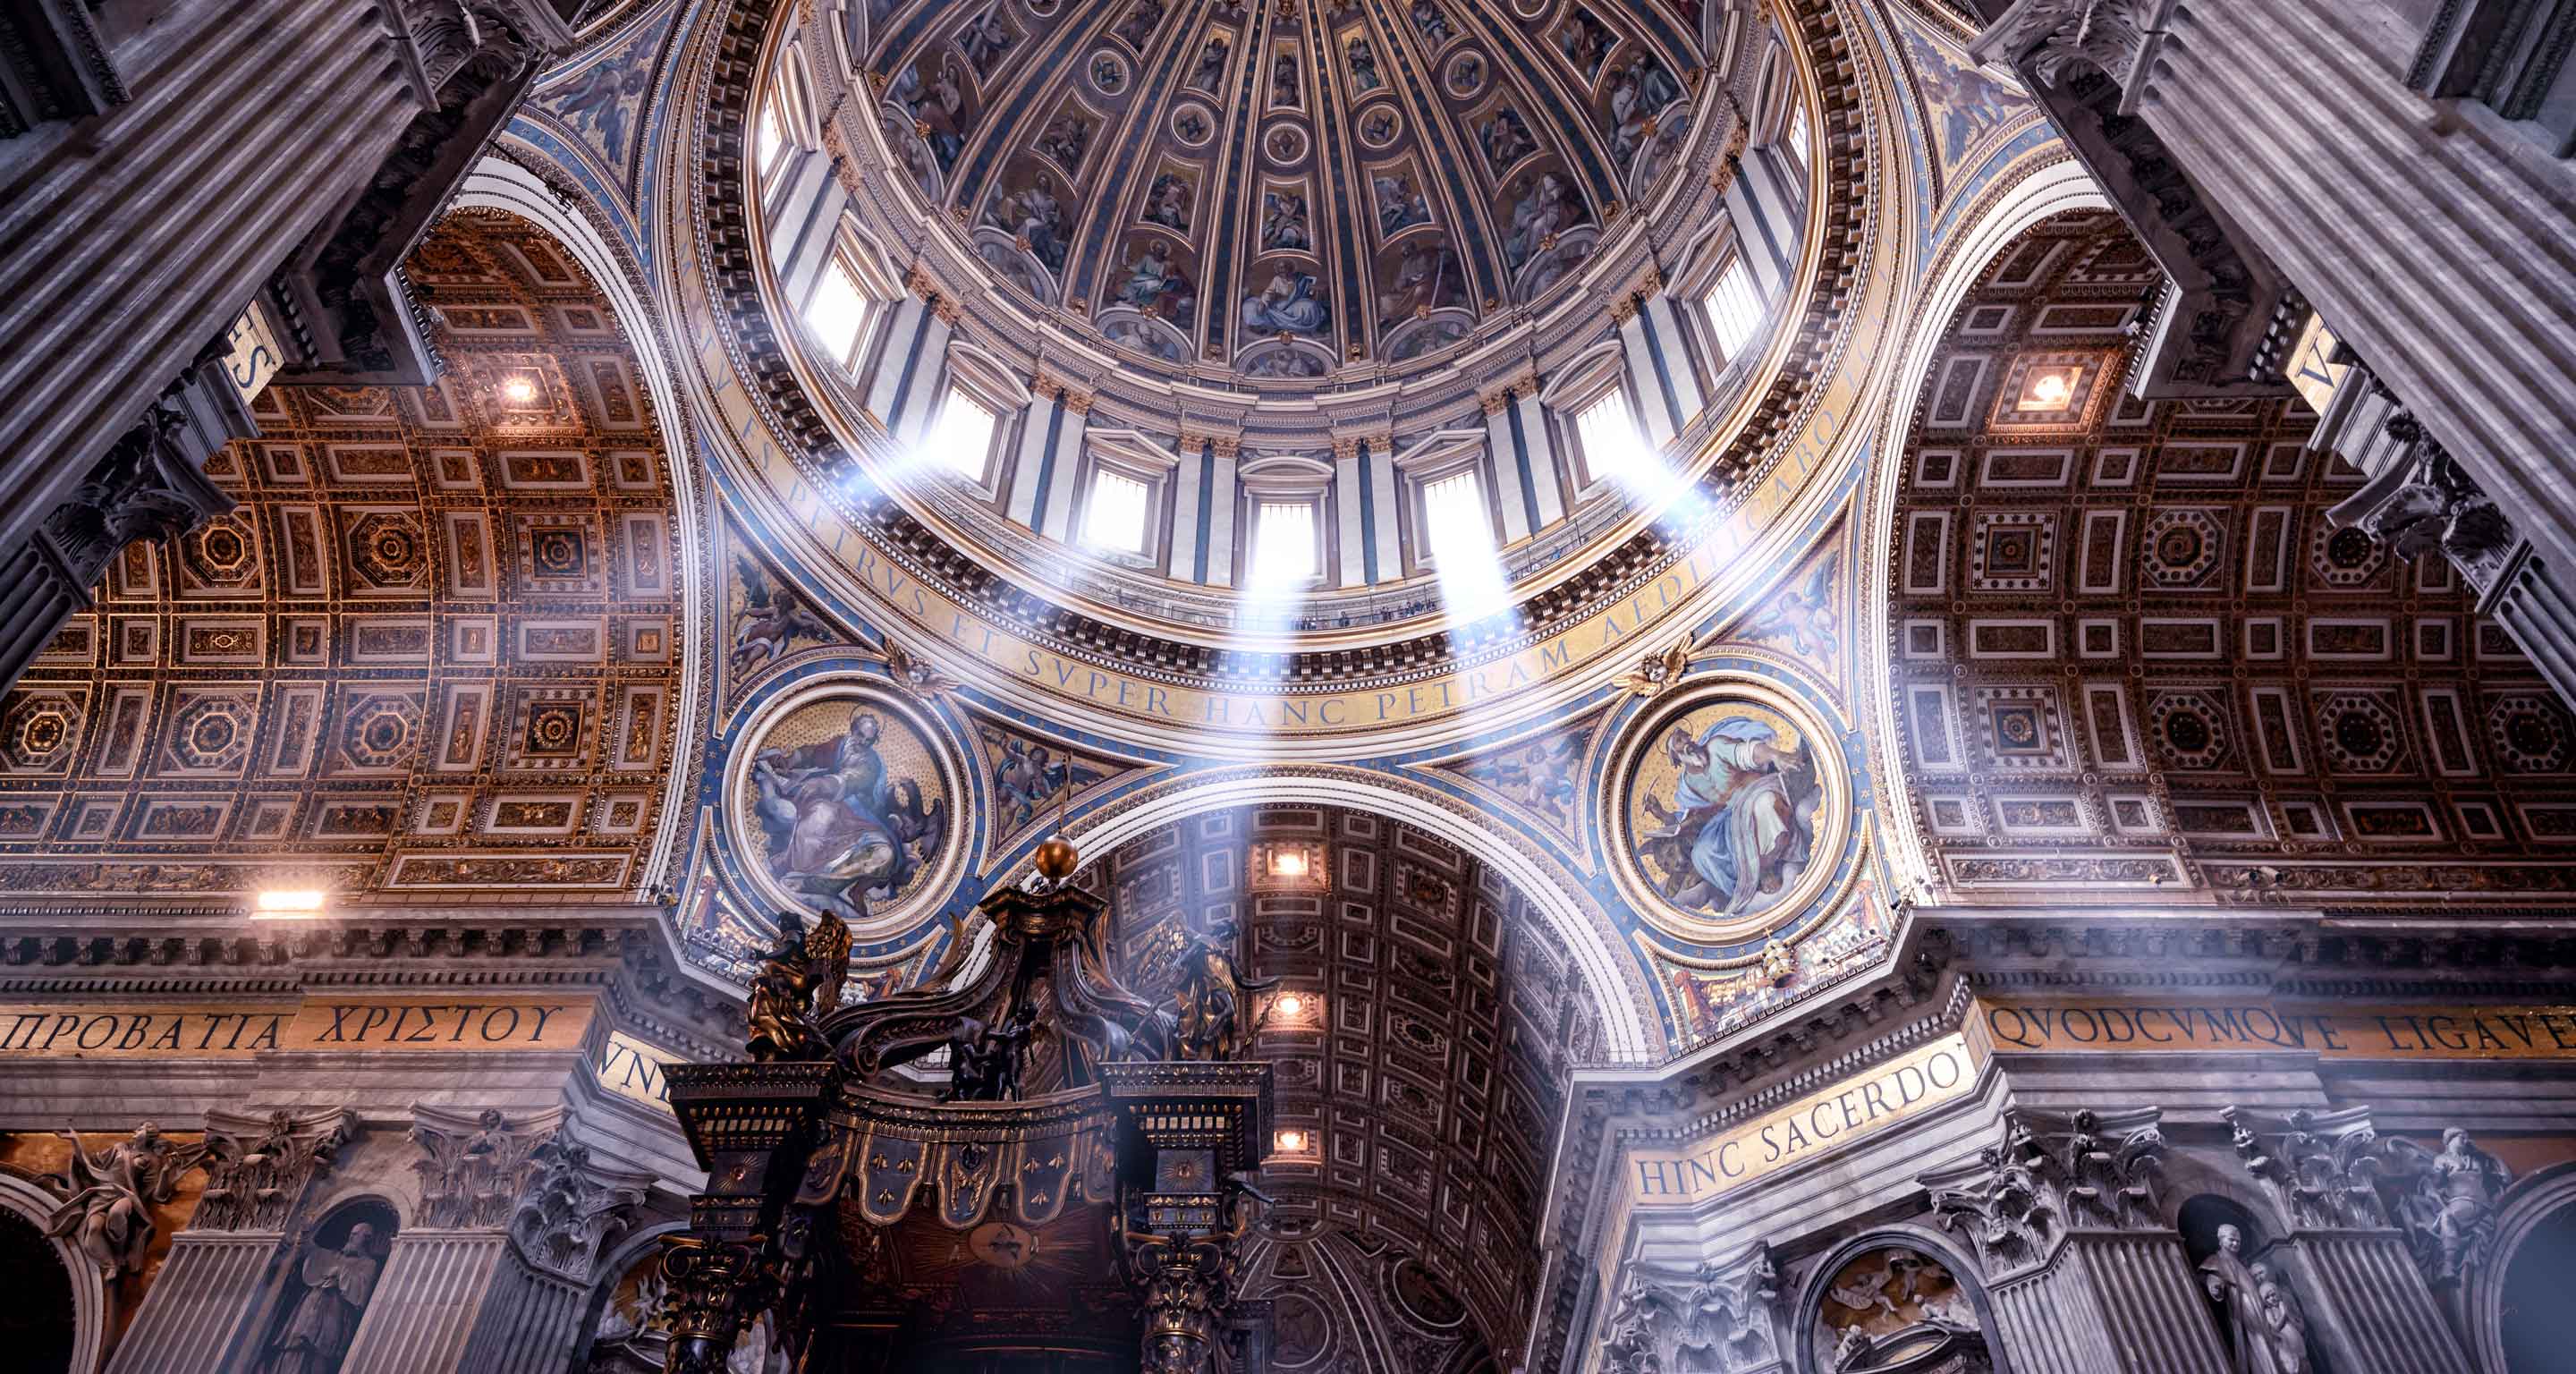 The dome of St. Peter's Basilica in Rome.